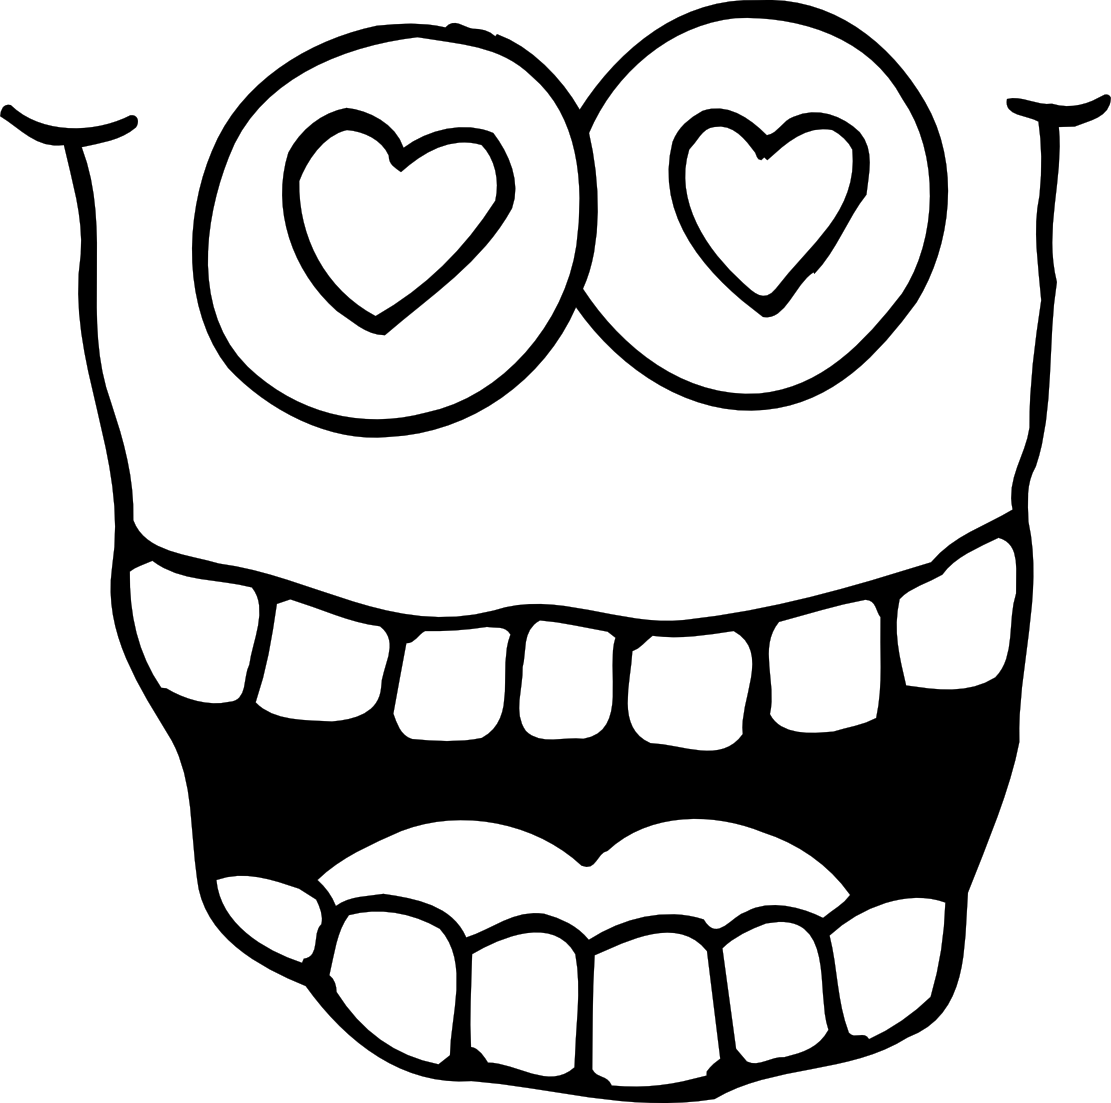 Googly Eyes Valentine 4 Art Coloring Book Colouring Sheet Page ...